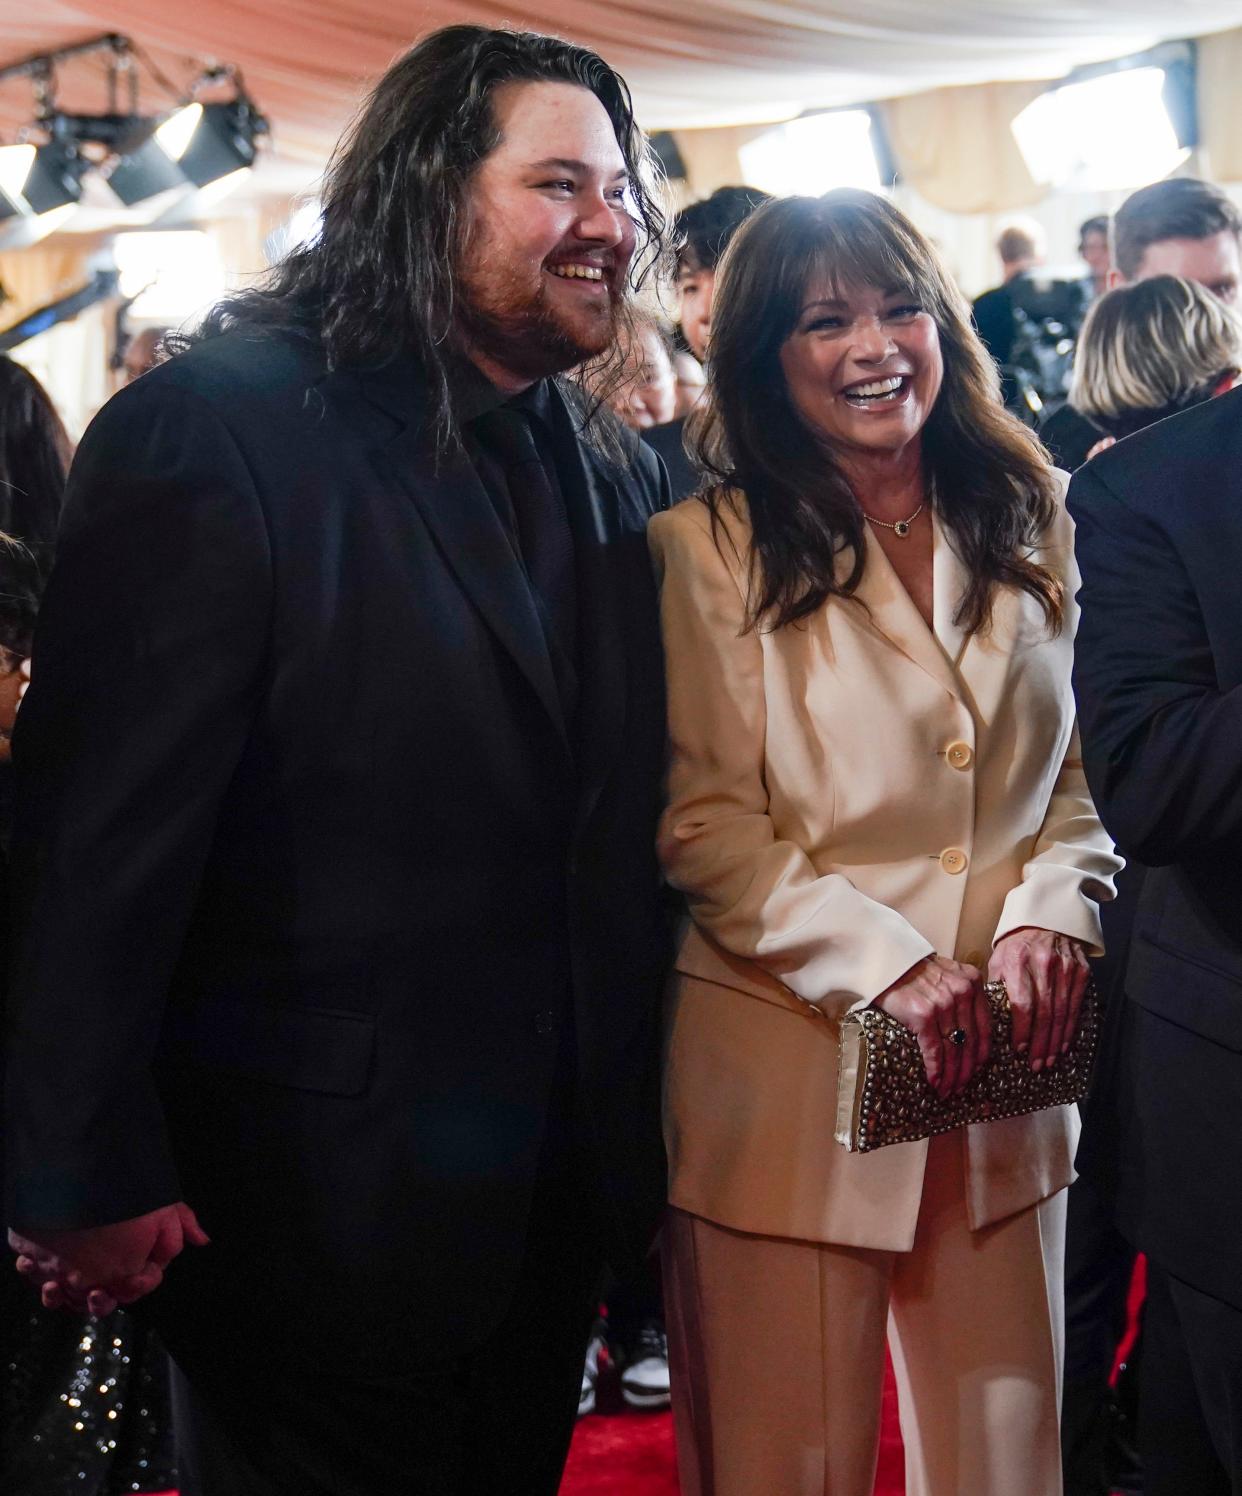 Valerie Bertinelli (right) accompanied her son Wolfgang Van Halen to the Oscars on March 10, where Van Halen backed Ryan Gosling on "I'm Just Ken."